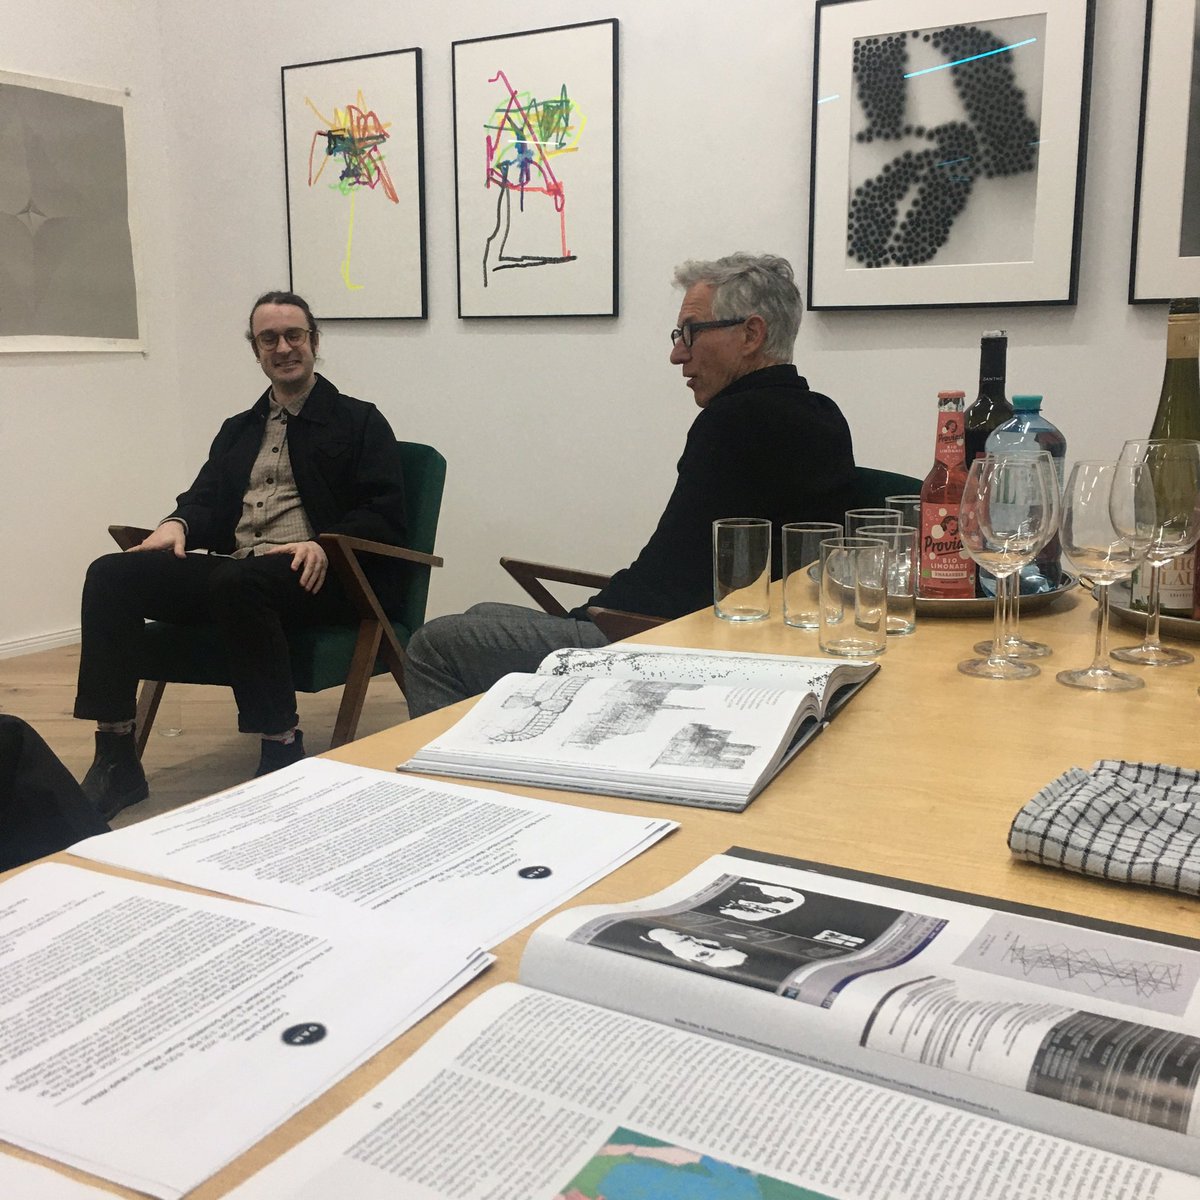 We thank everyone who attended Marcel Schwittlick’s artist talk last evening! Thanks for being there. Watch out for more DAM Projects events! #artisttalk #MarcelSchwittlick #DAMProjects #thankyou